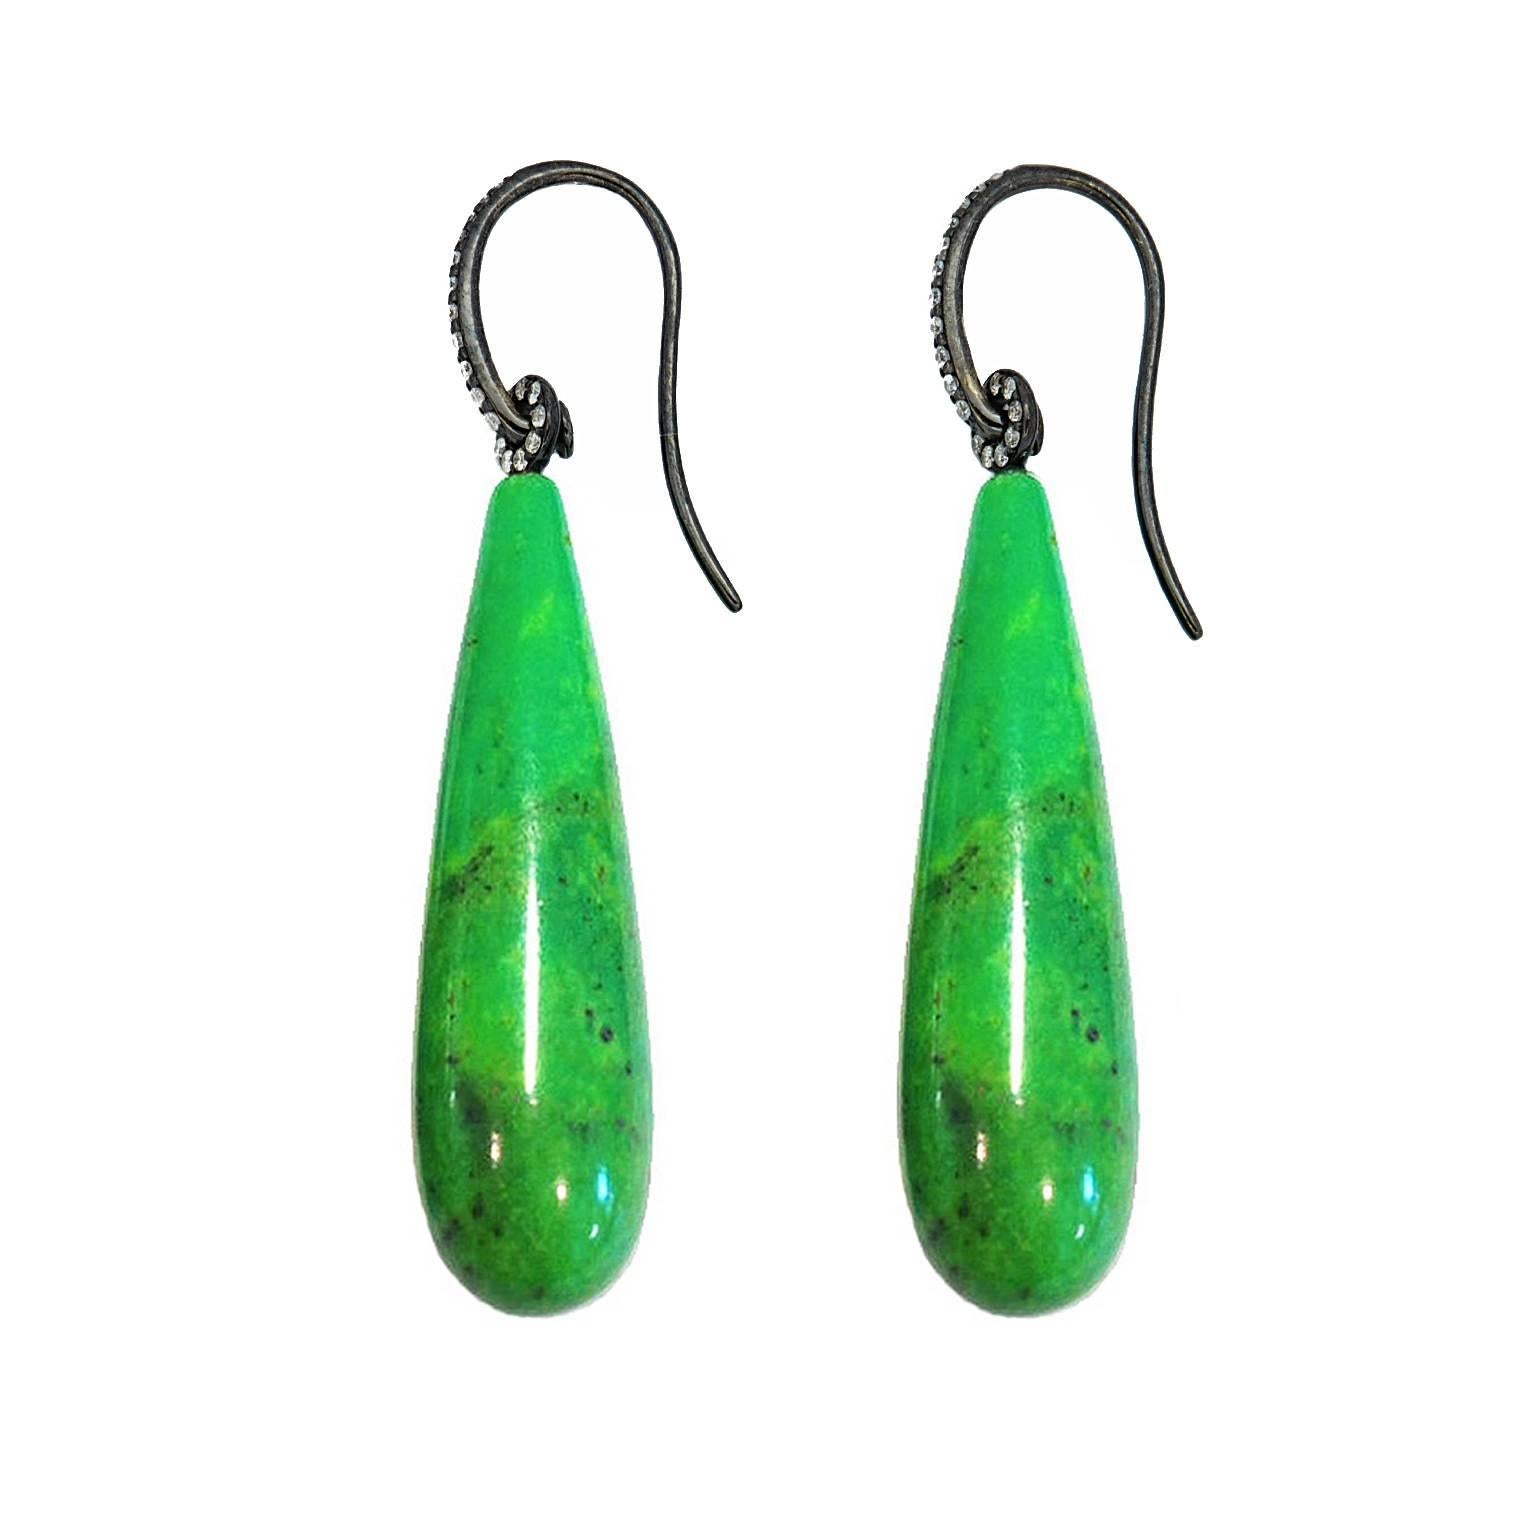 These vibrant green nevada turquoise 42.5 ct earrings will catch one’s eye.
18K white gold black-rhodium-plated with 38 brilliant-cut diamonds and a length of 48.5 mm. At the widest point they are 10 mm.
Designed by Colleen B. Rosenblat 
